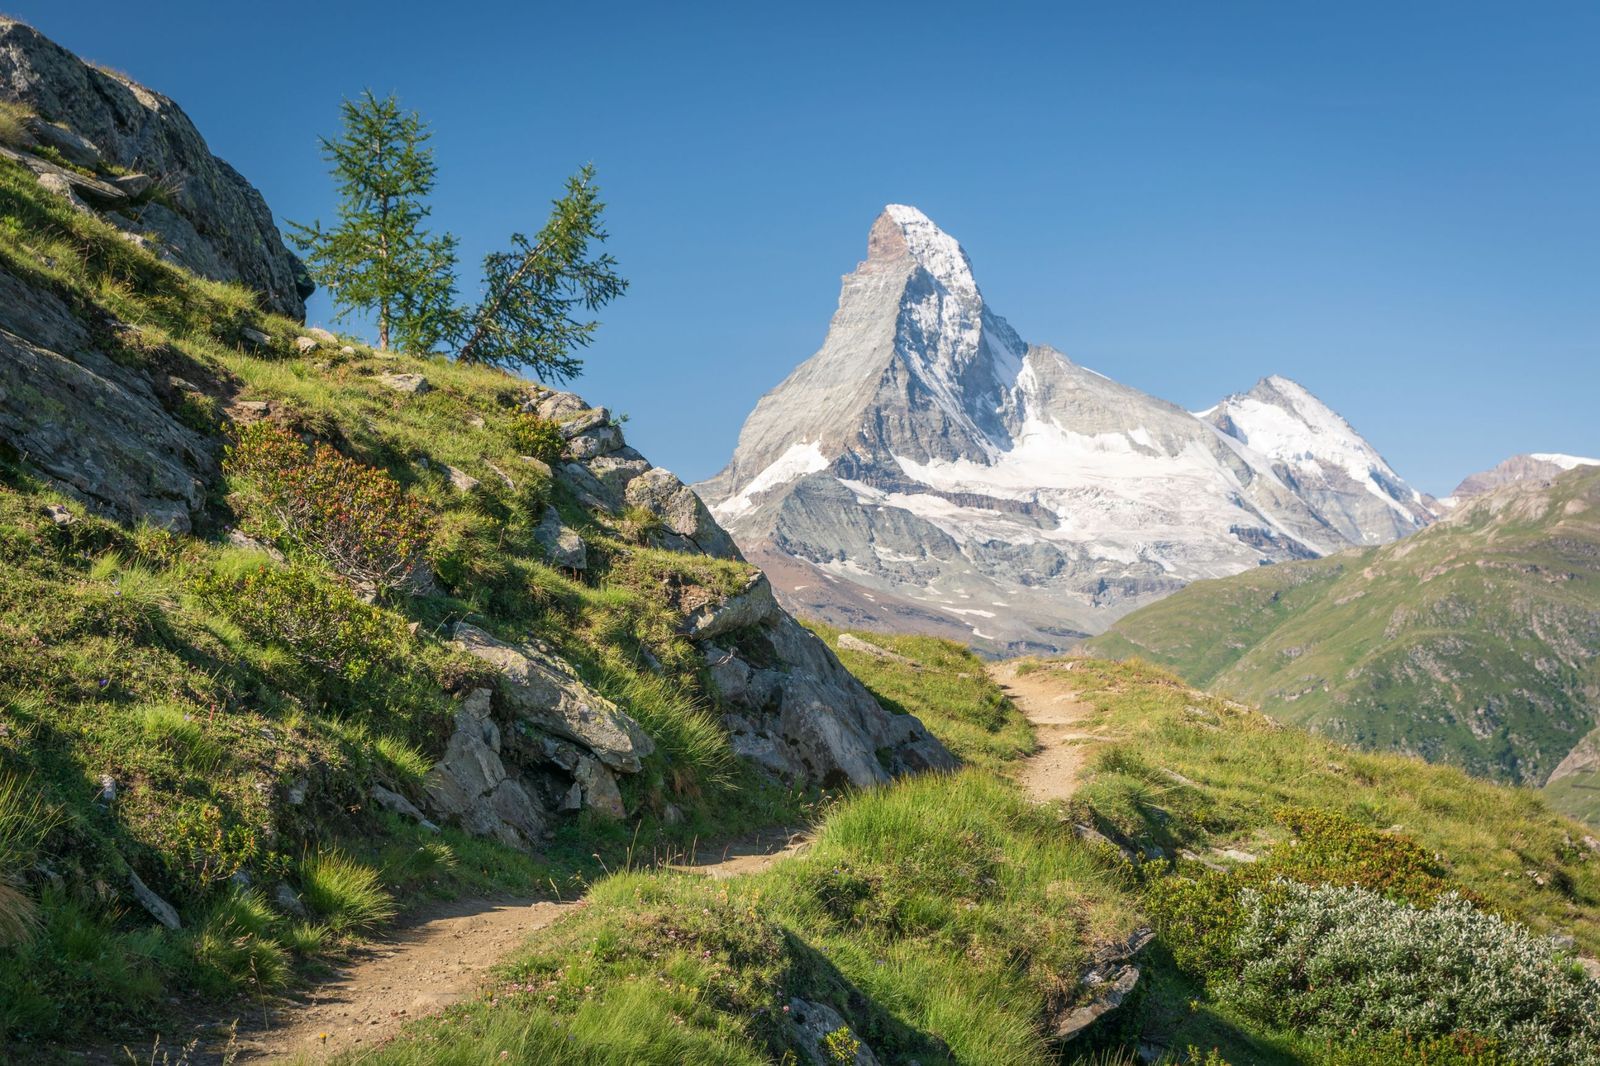 The Matterhorn as seen from the Europa Trail, which forms part of the Tour of the Matterhorn. Photo: Getty